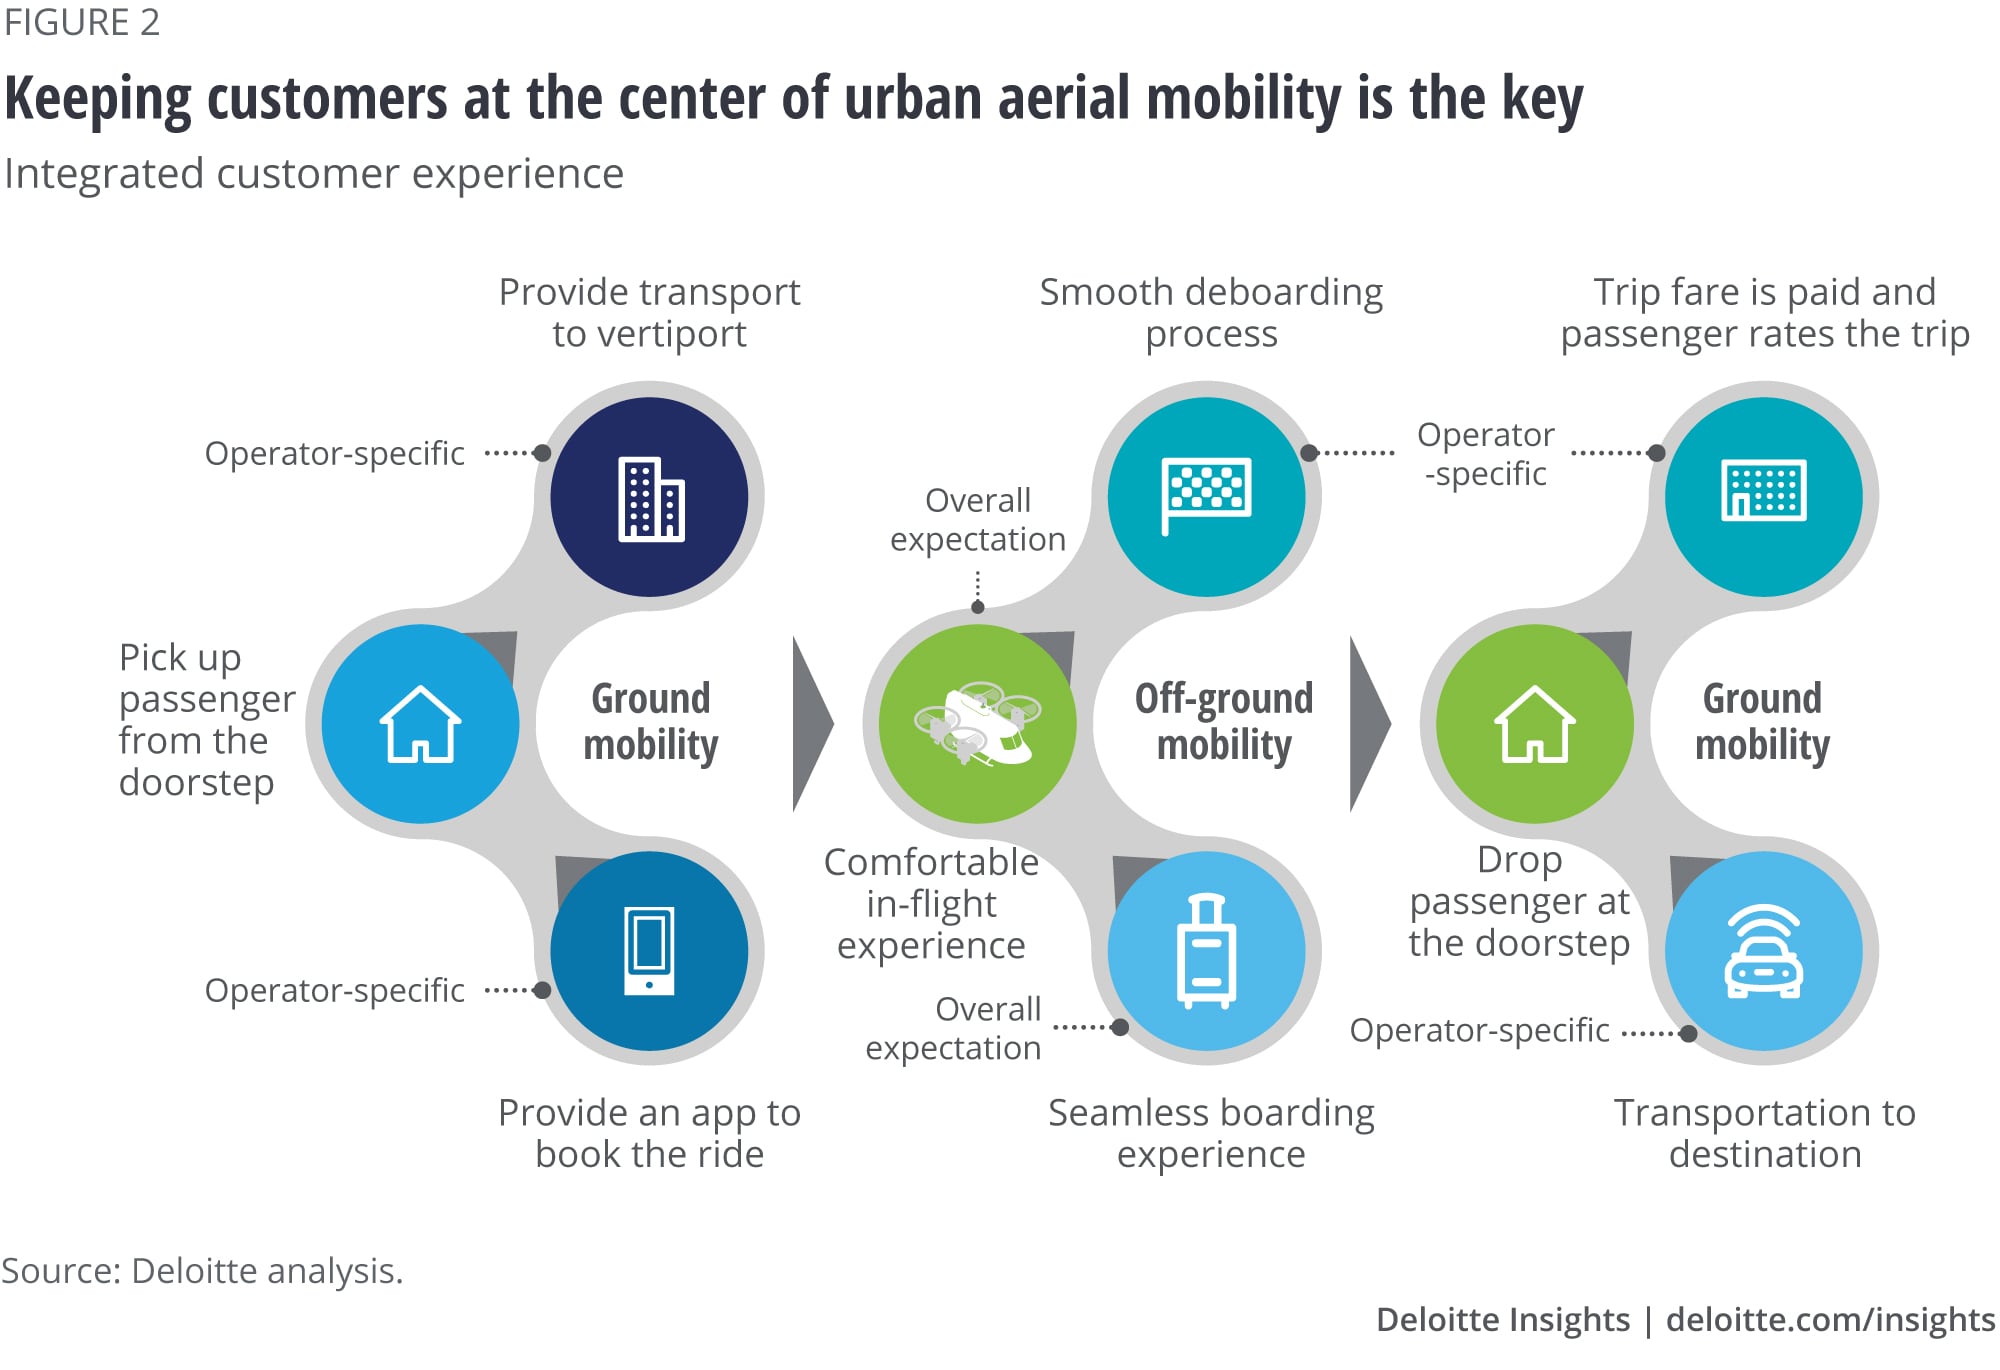 Keeping customers at the center of urban aerial mobility is the key